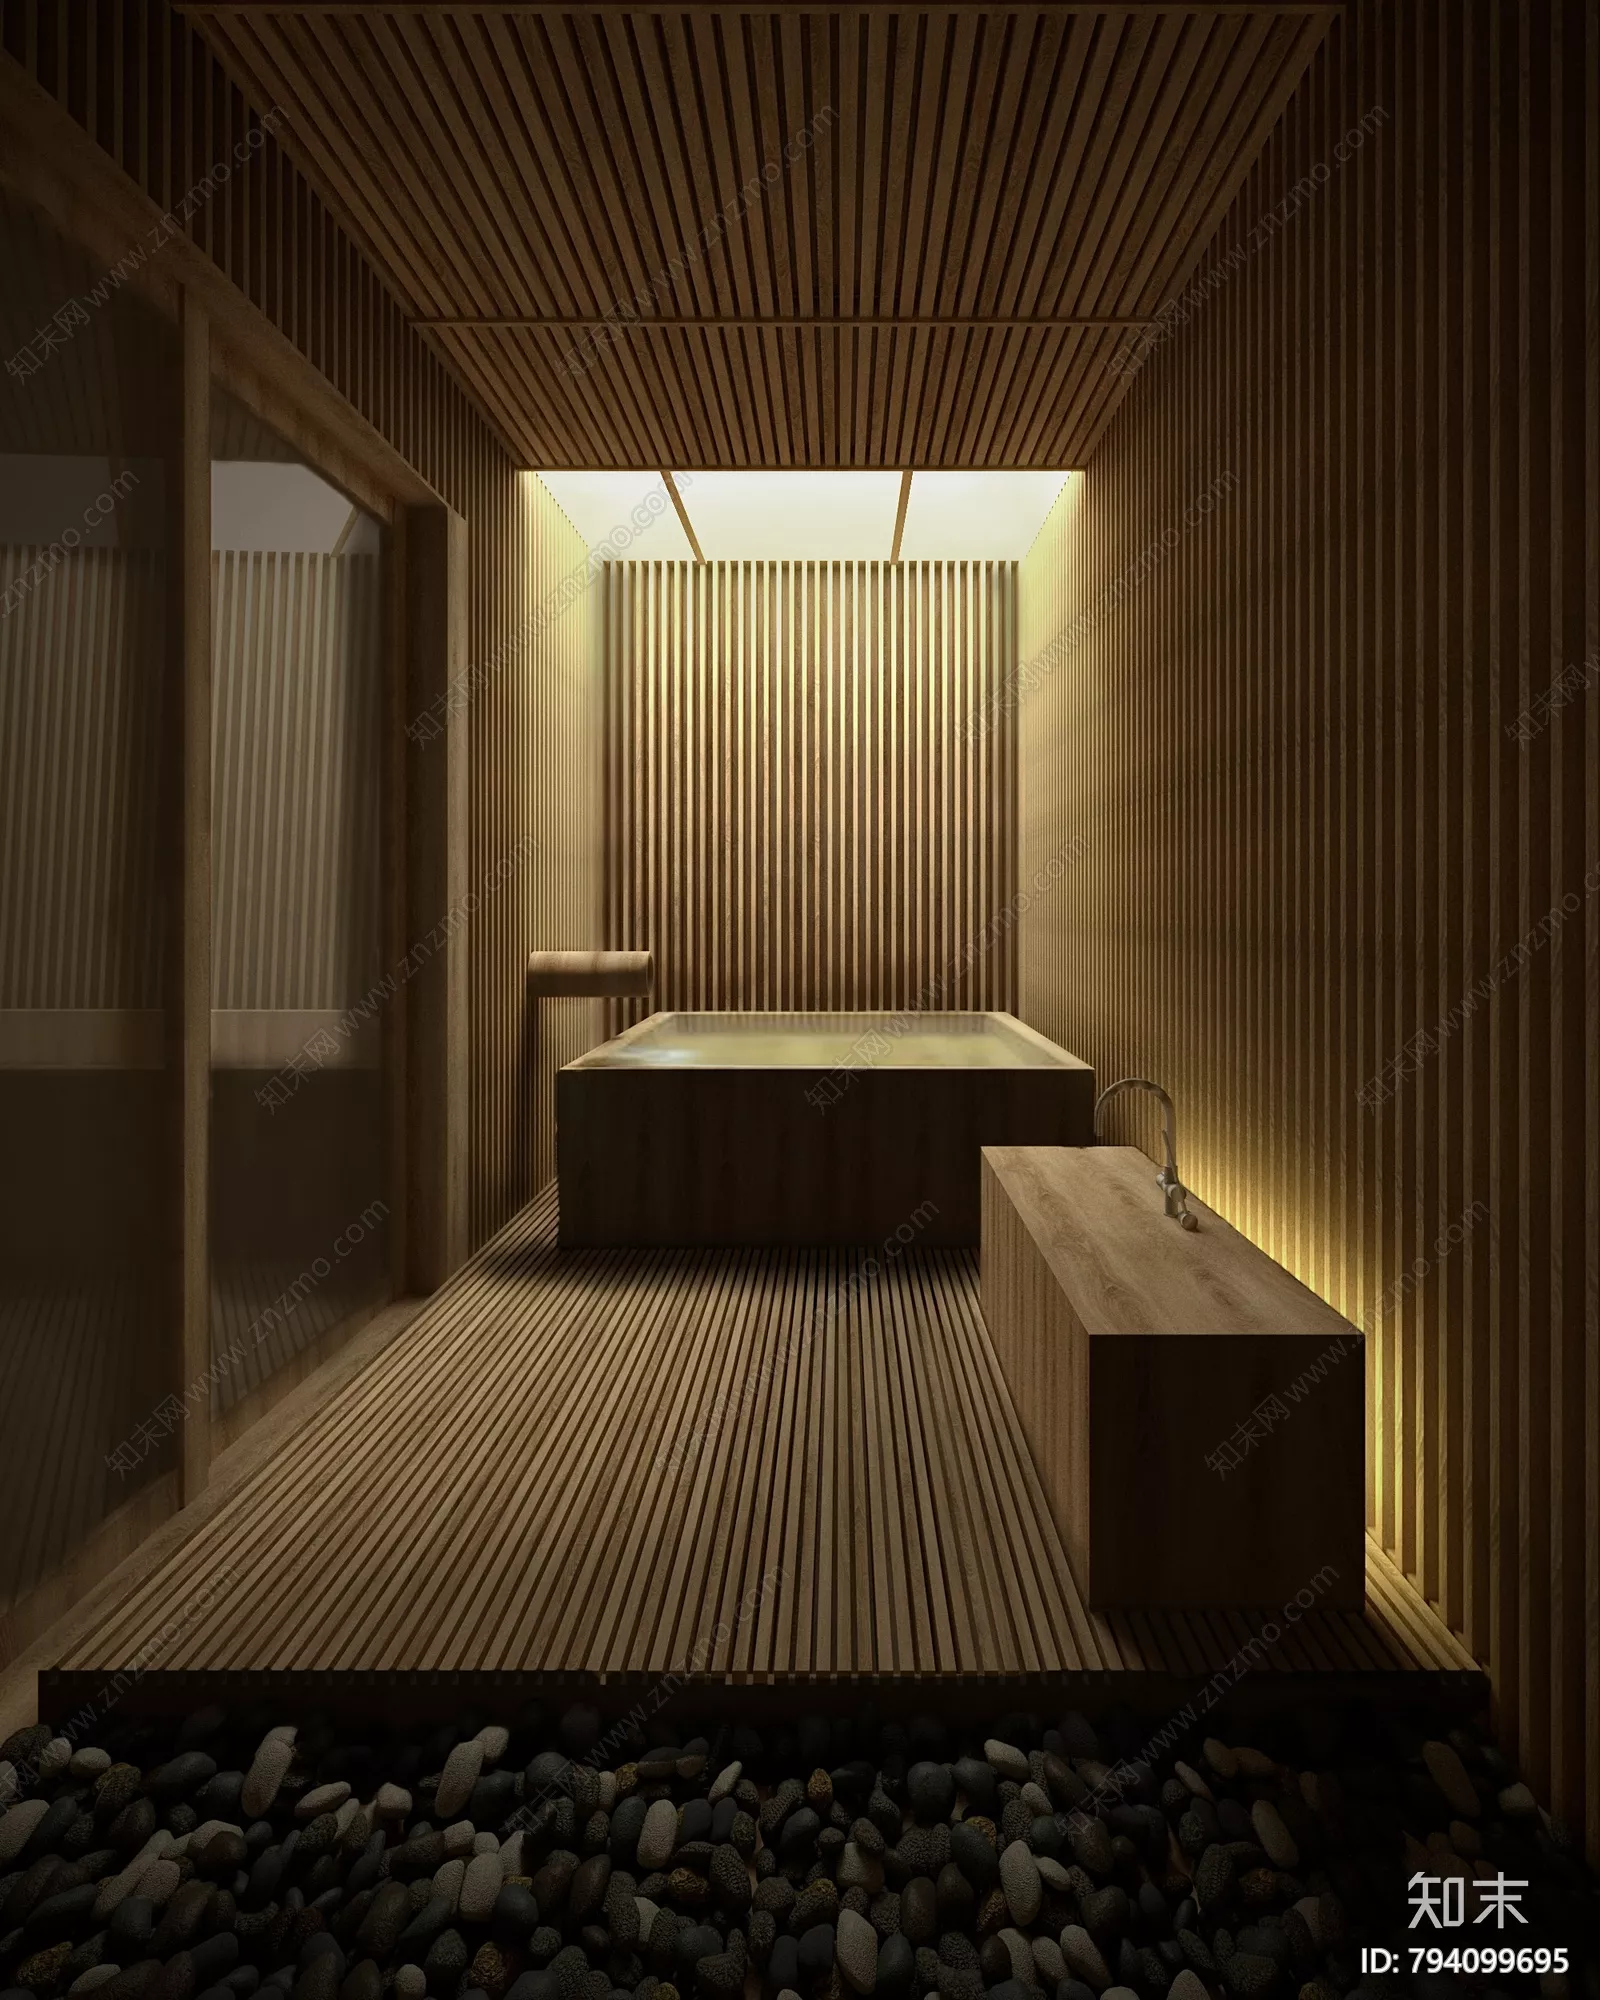 MODERN SPA AND BEAUTY - SKETCHUP 3D SCENE - VRAY OR ENSCAPE - ID14039